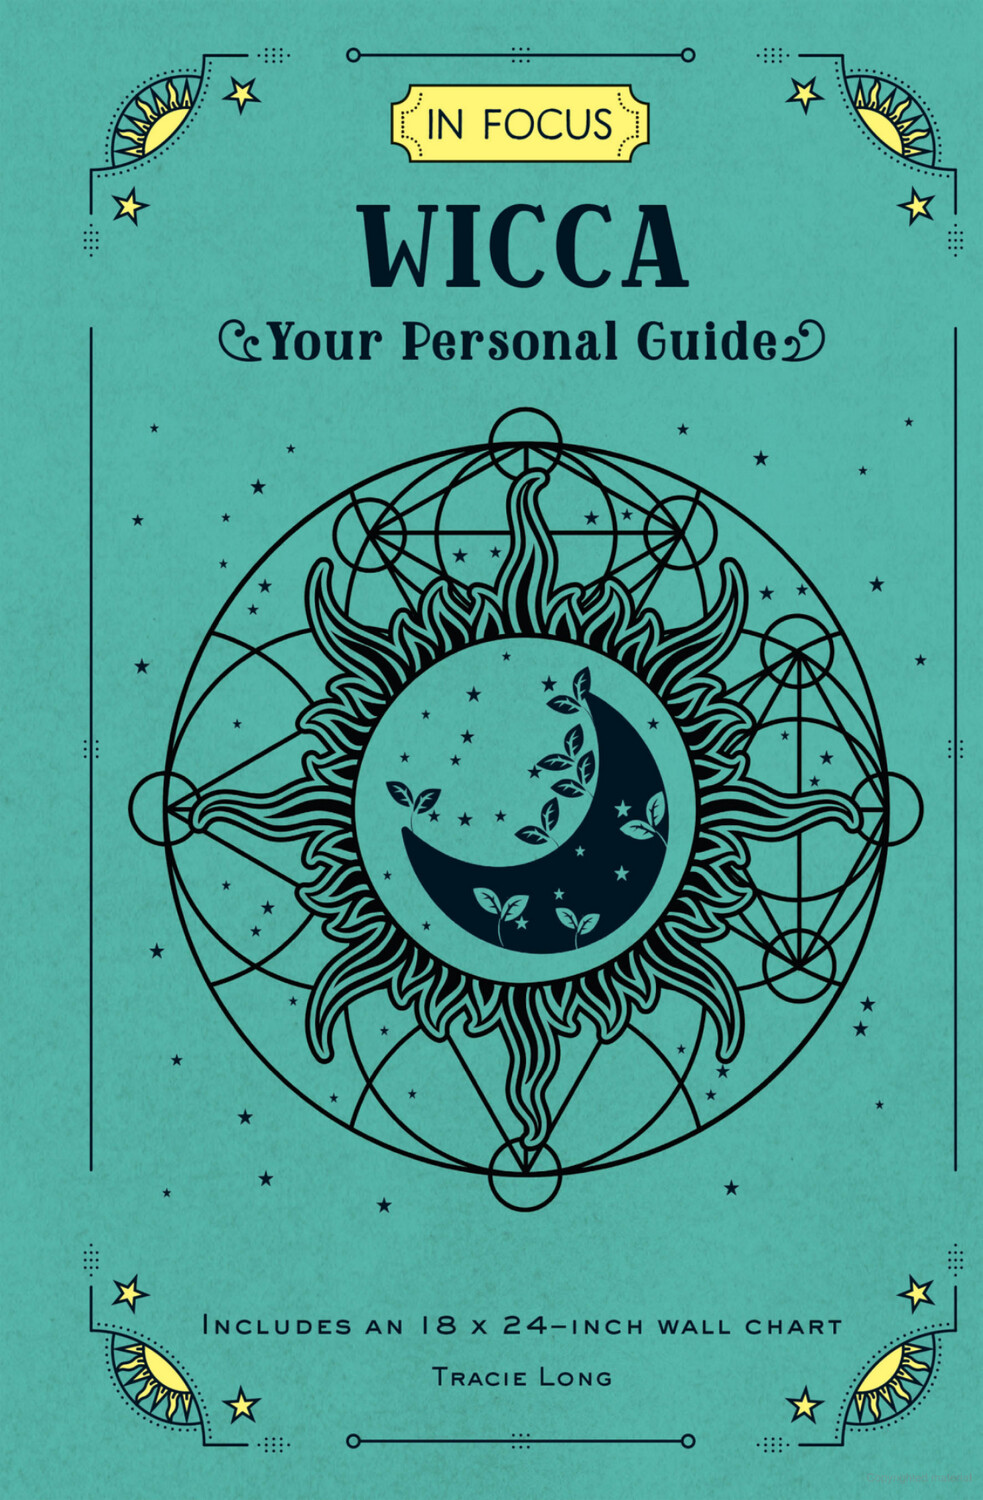 In Focus Wicca:
Your Personal Guide
By Tracie Long